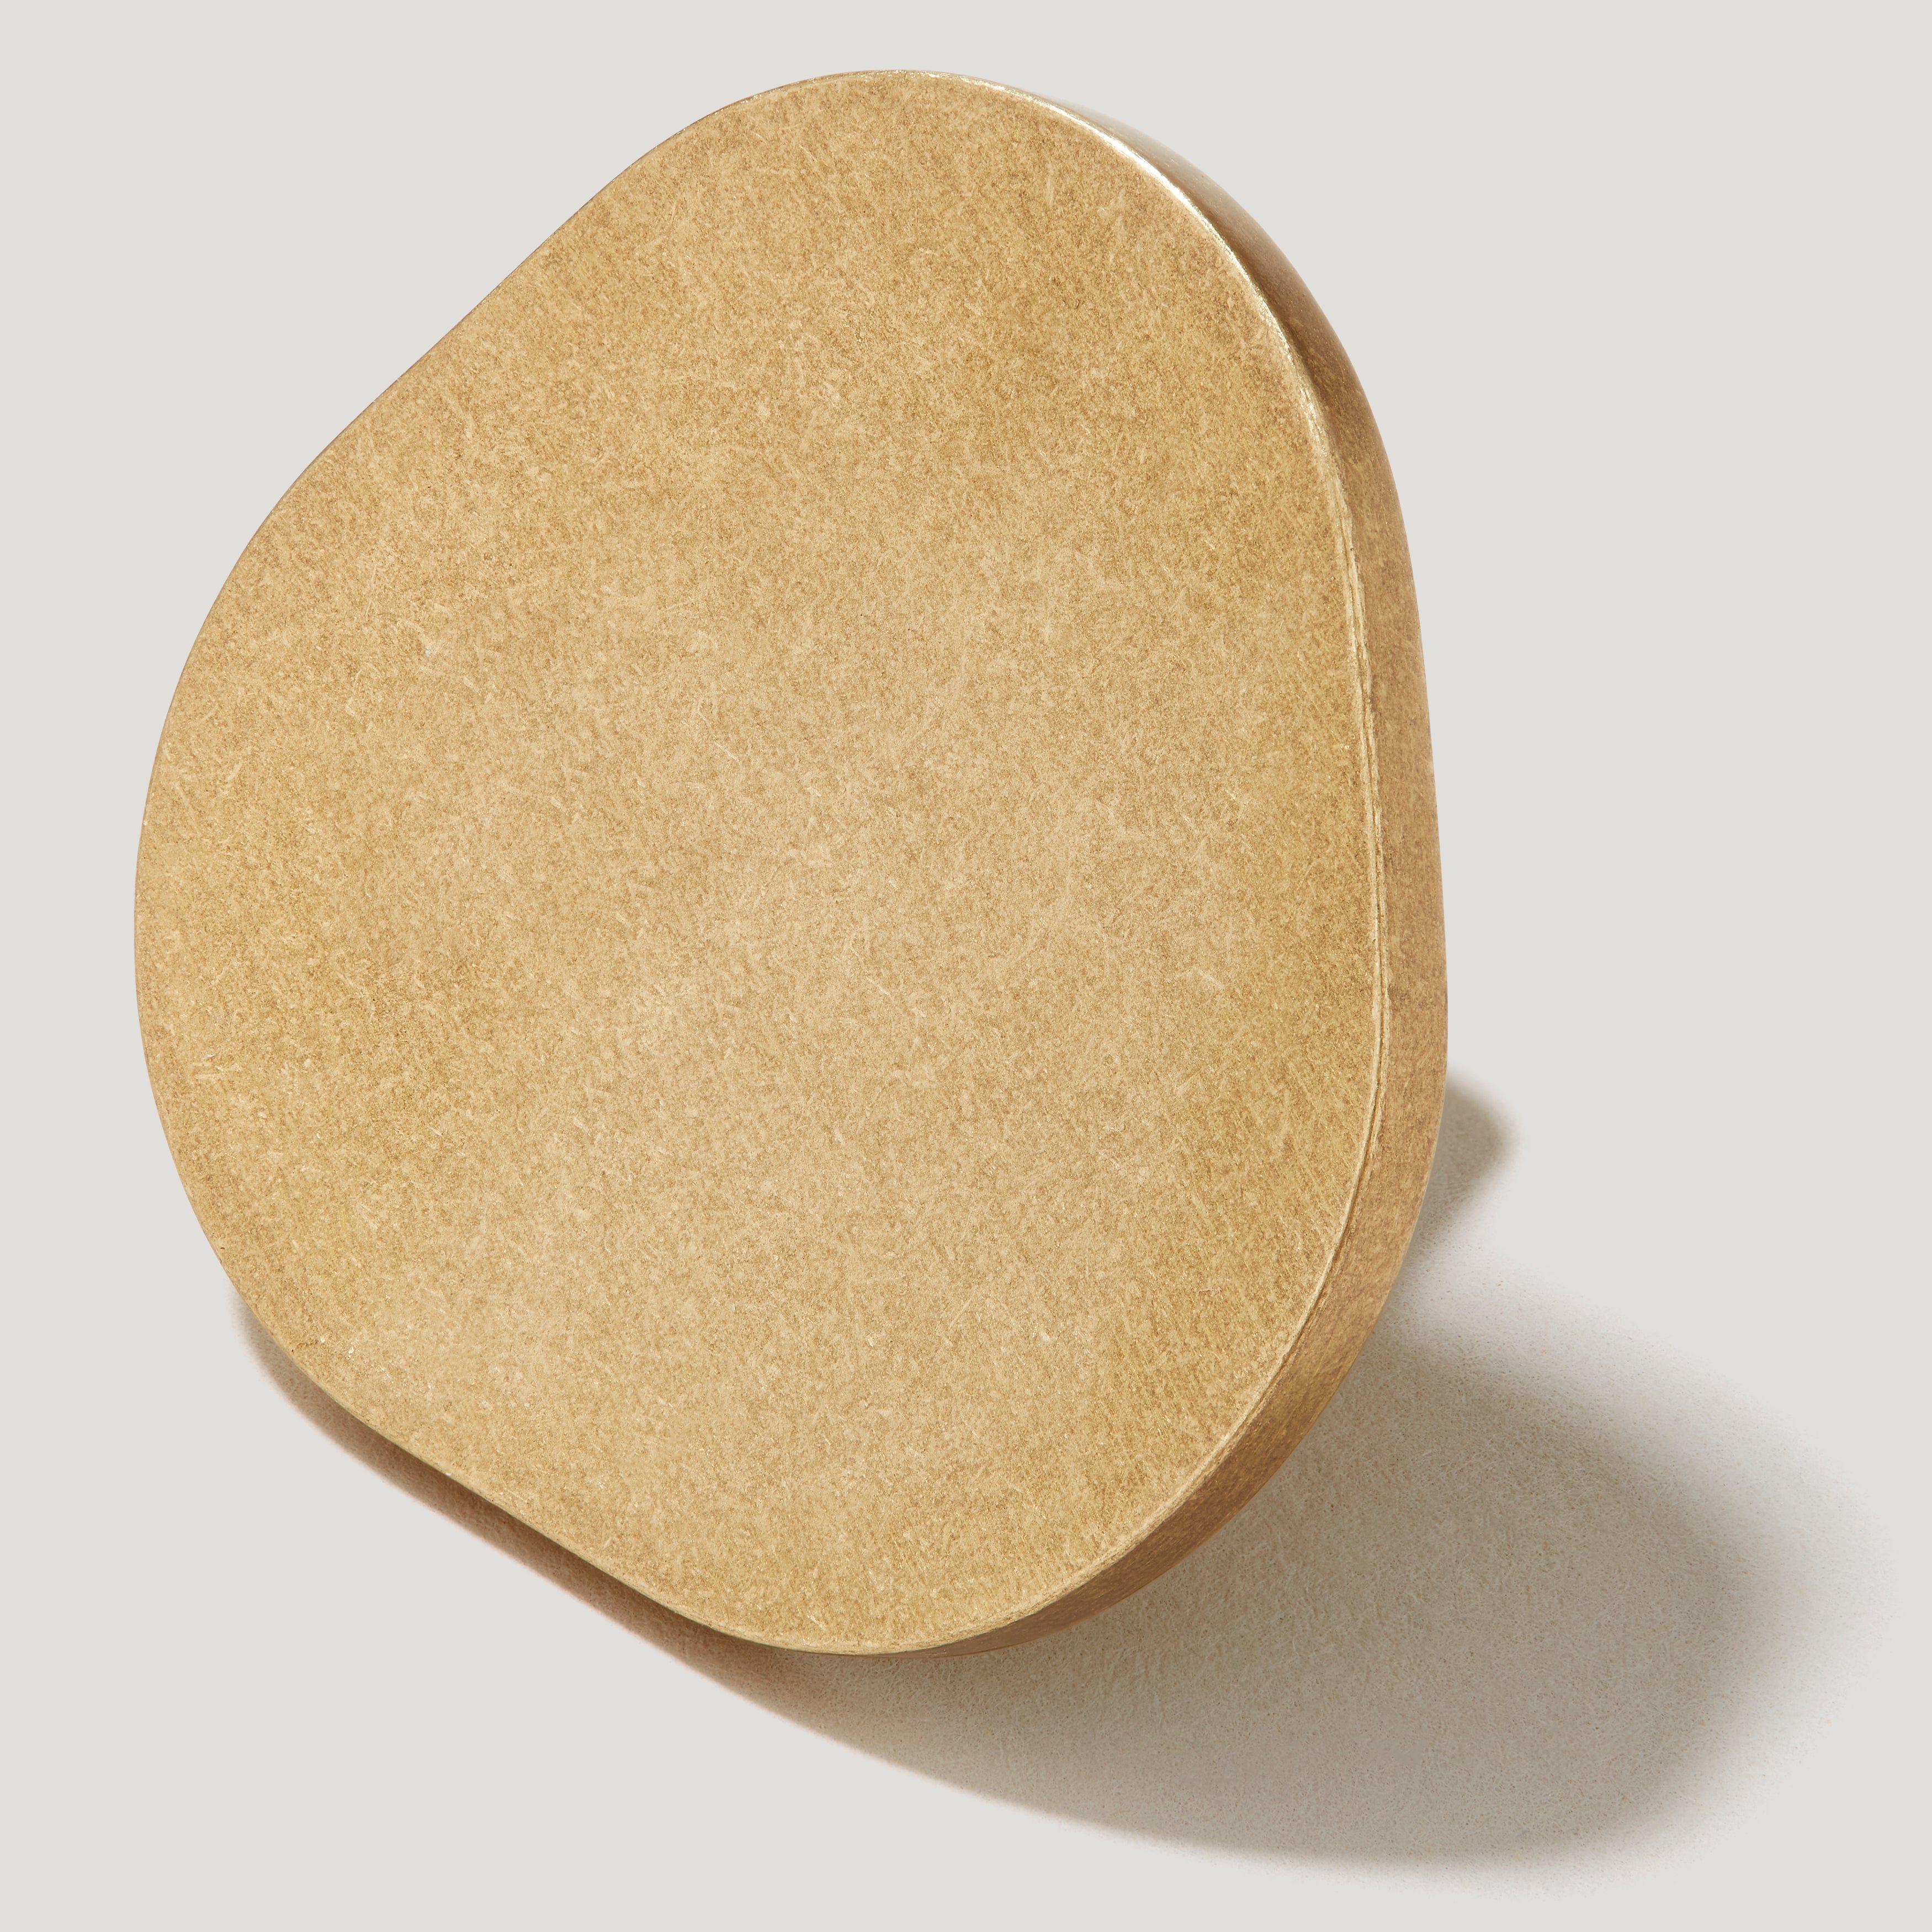 Plank Hardware Cabinetry PEBBLE Knob - Aged Brass